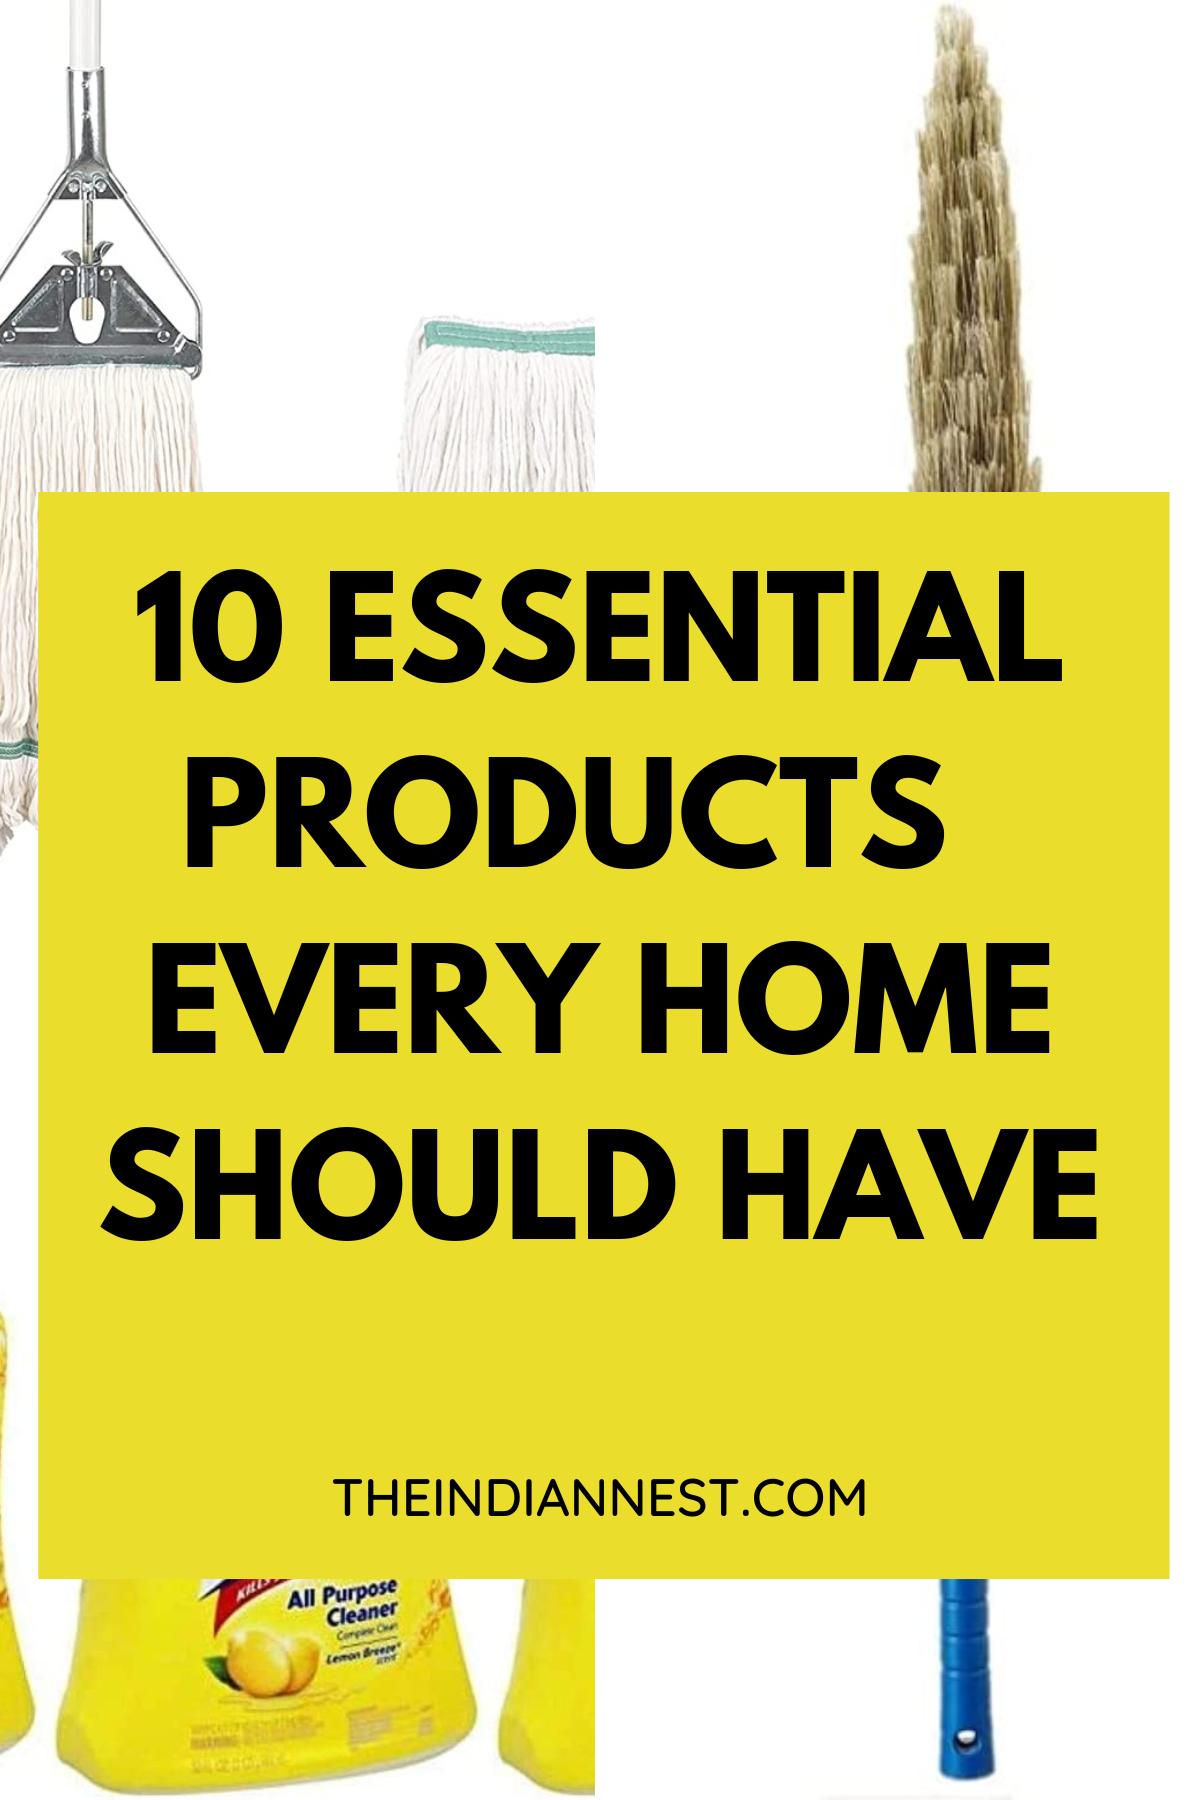 basic and essential cleaning tools and products every home should have